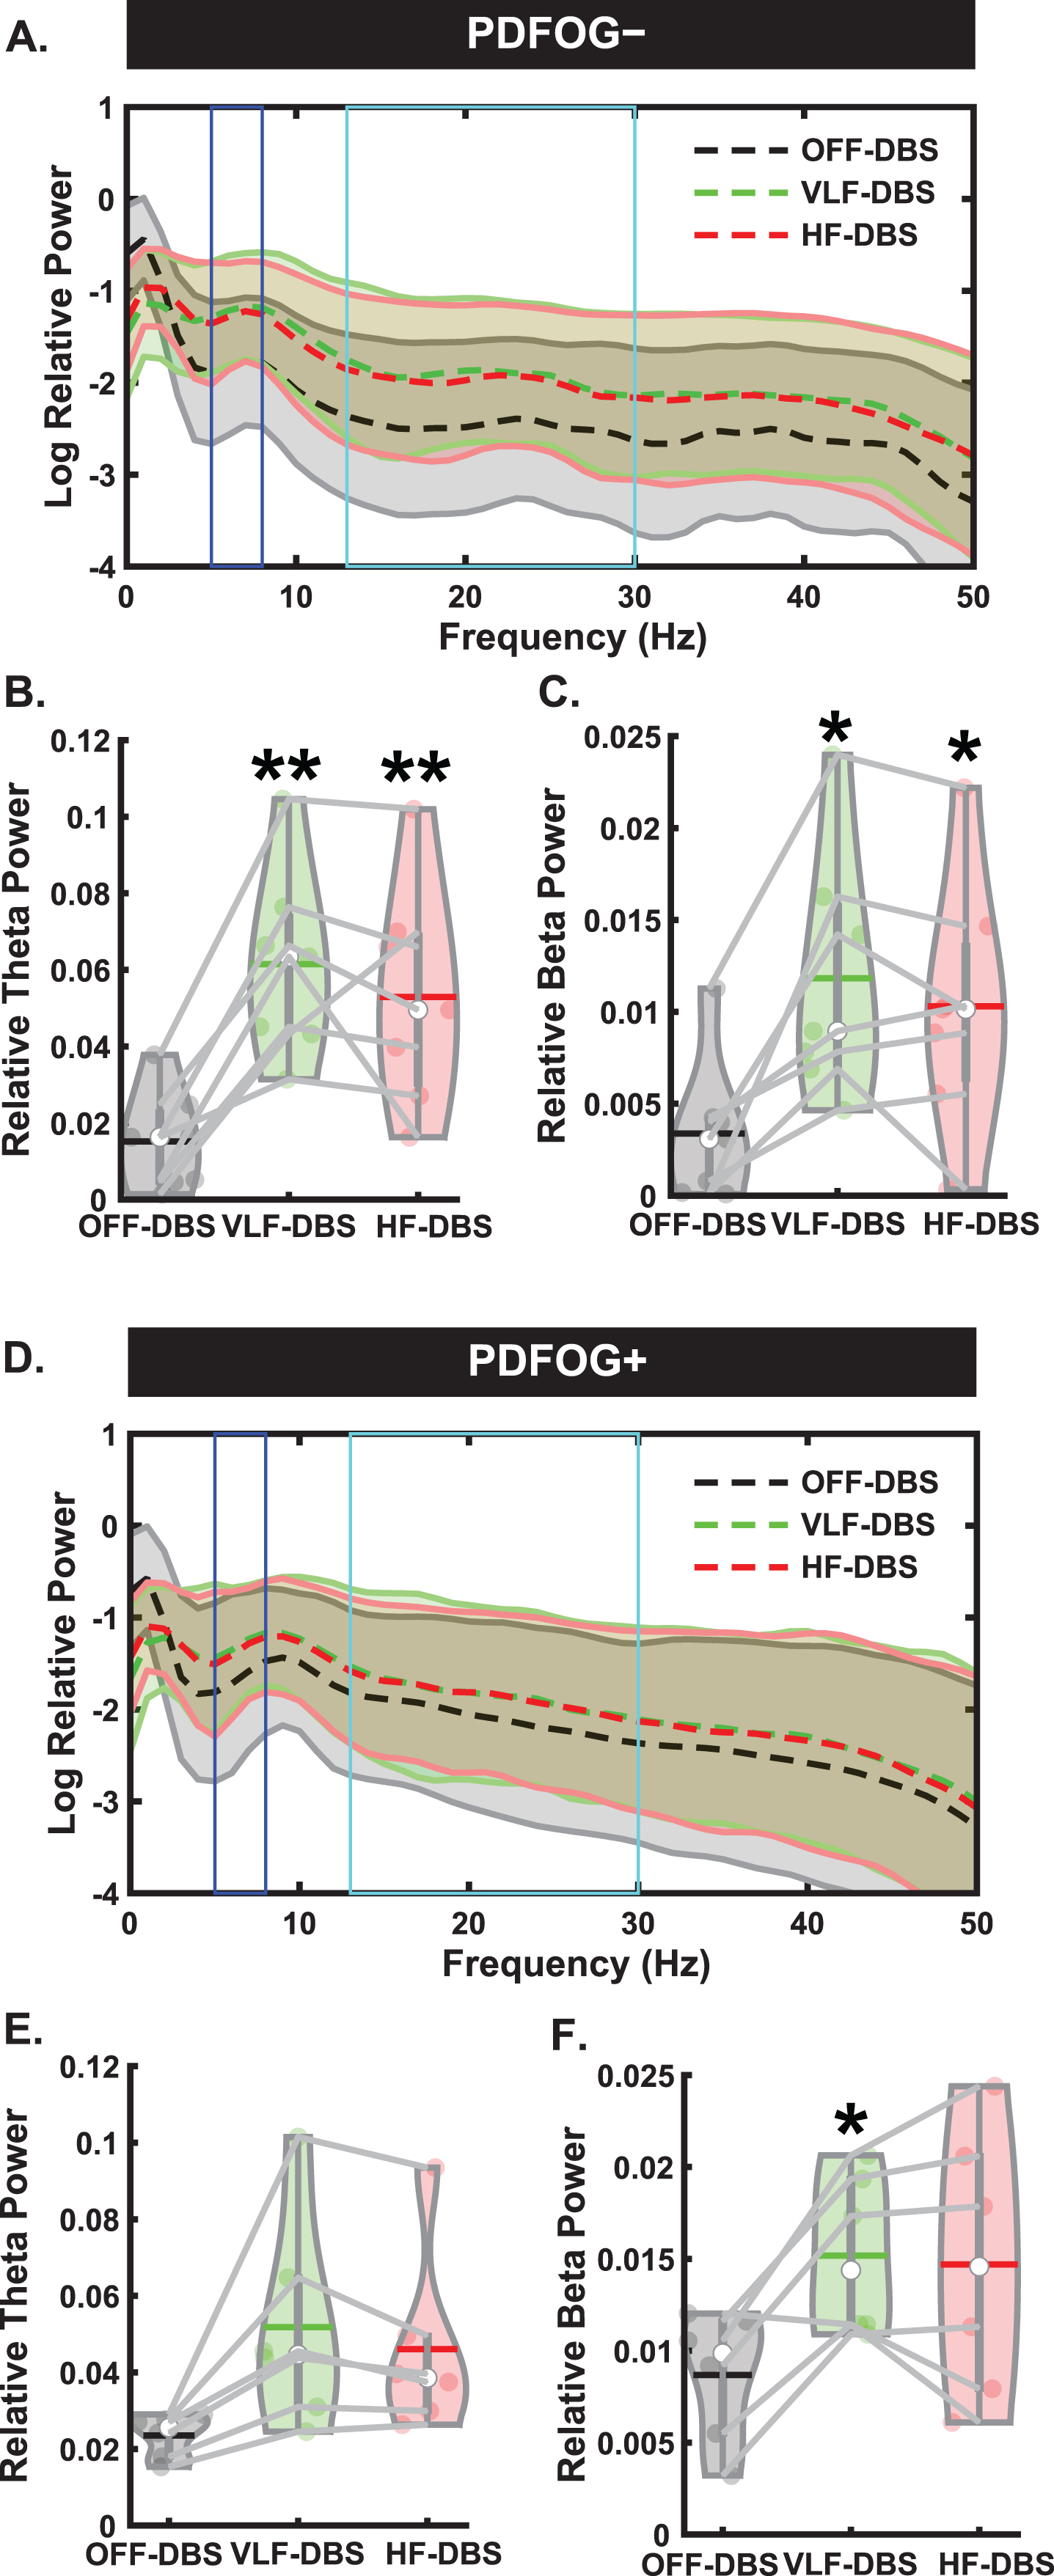 Different spectral responses to STN-DBS between PDFOG–and PDFOG + subgroups during the preparatory period. A) Spectral power differences between stimulation parameters across multiple frequencies for the PDFOG–subgroup during the preparatory period. B) STN very low frequency (VLF)-DBS and high frequency (HF)-DBS result in increased relative theta power during the preparatory period for the PDFOG–subgroup. C) VLF-DBS and HF-DBS result in increased relative beta power during the preparatory period for the PDFOG–subgroup. D) Spectral power differences between stimulation parameters across multiple frequencies for the PDFOG + subgroup during the preparatory period. E) STN VLF-DBS and HF-DBS do not affect theta power during the preparatory period for the PDFOG + subgroup. F) VLF-DBS, but not HF-DBS, resulted in increased relative beta power during the preparatory period for the PDFOG + subgroup. *p < 0.05 vs. OFF-DBS, **p < 0.01 vs. OFF-DBS. In violin plots, horizontal lines and white circles represent the mean and median values, respectively.